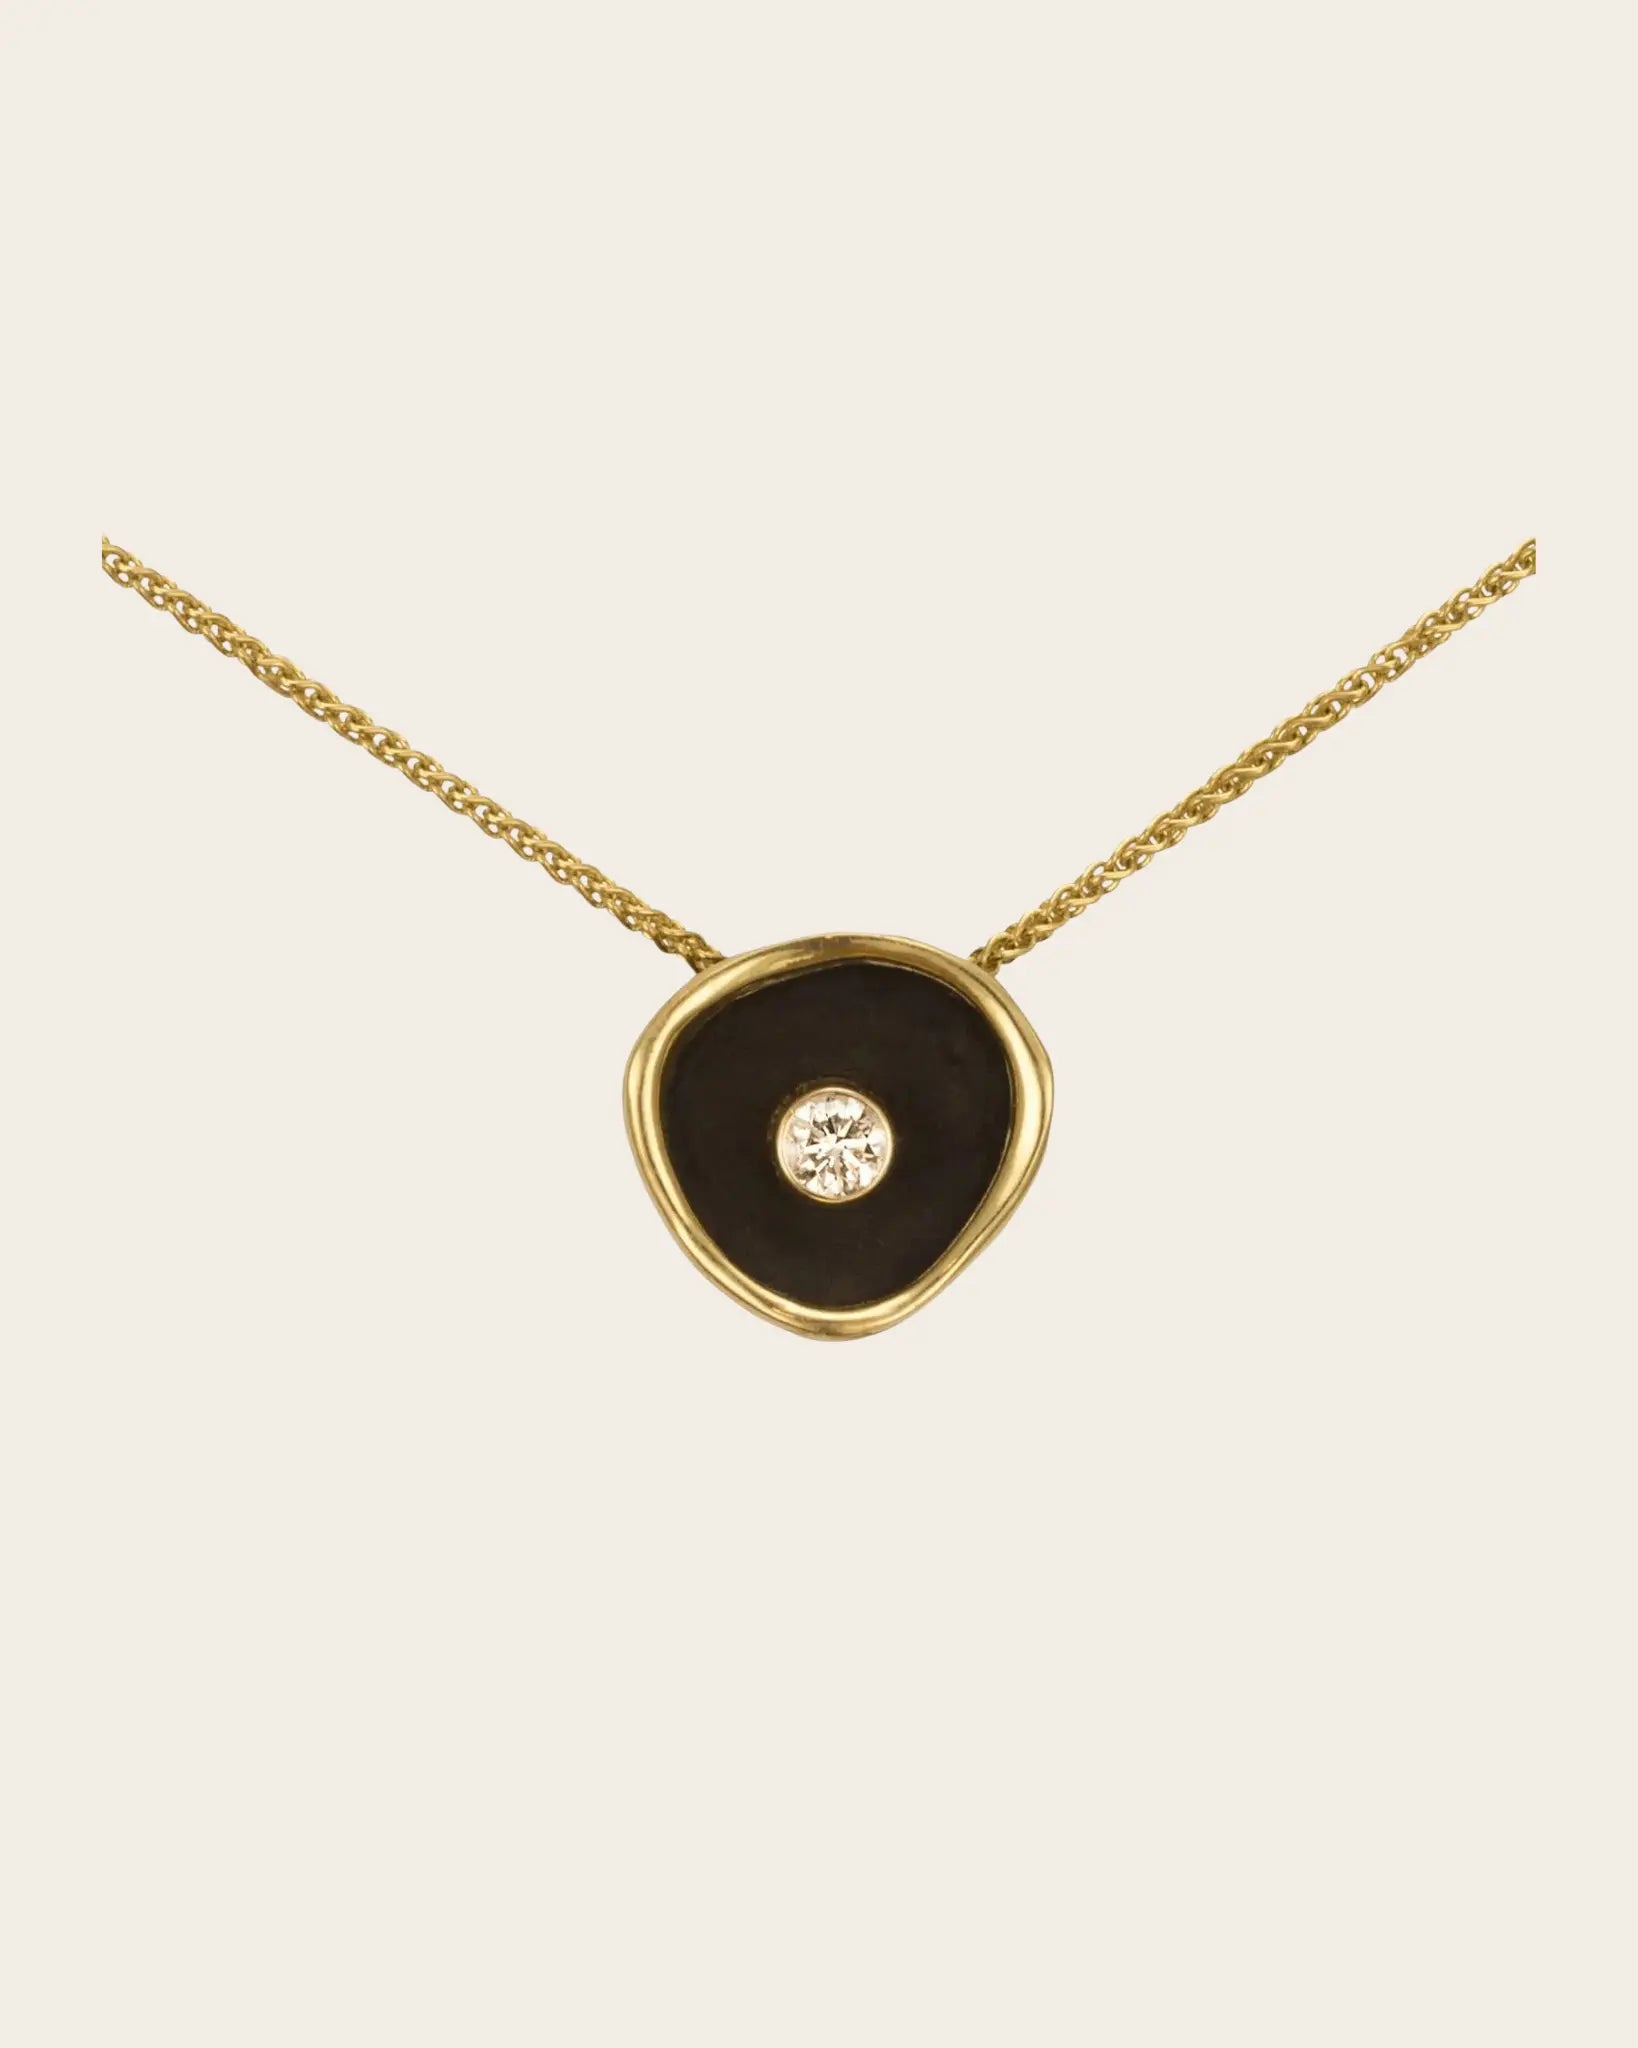 Confluence Single Cup Necklace Confluence Single Cup Necklace Sarah Graham Sarah Graham  Squash Blossom Vail